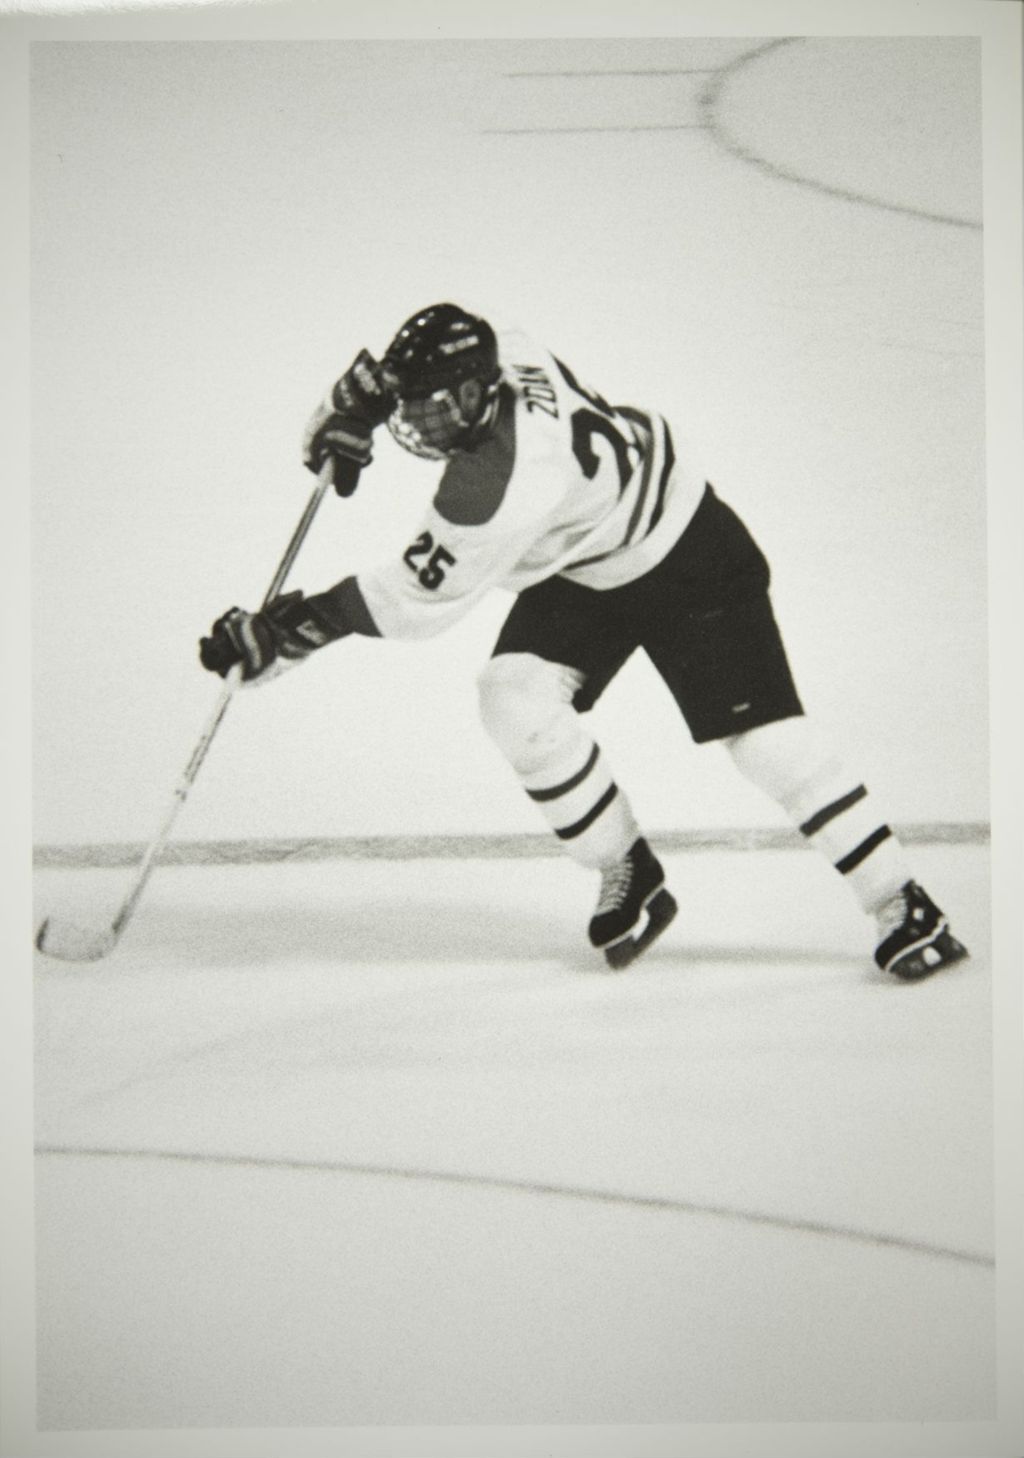 Miniature of Player on the University of Illinois at Chicago hockey team